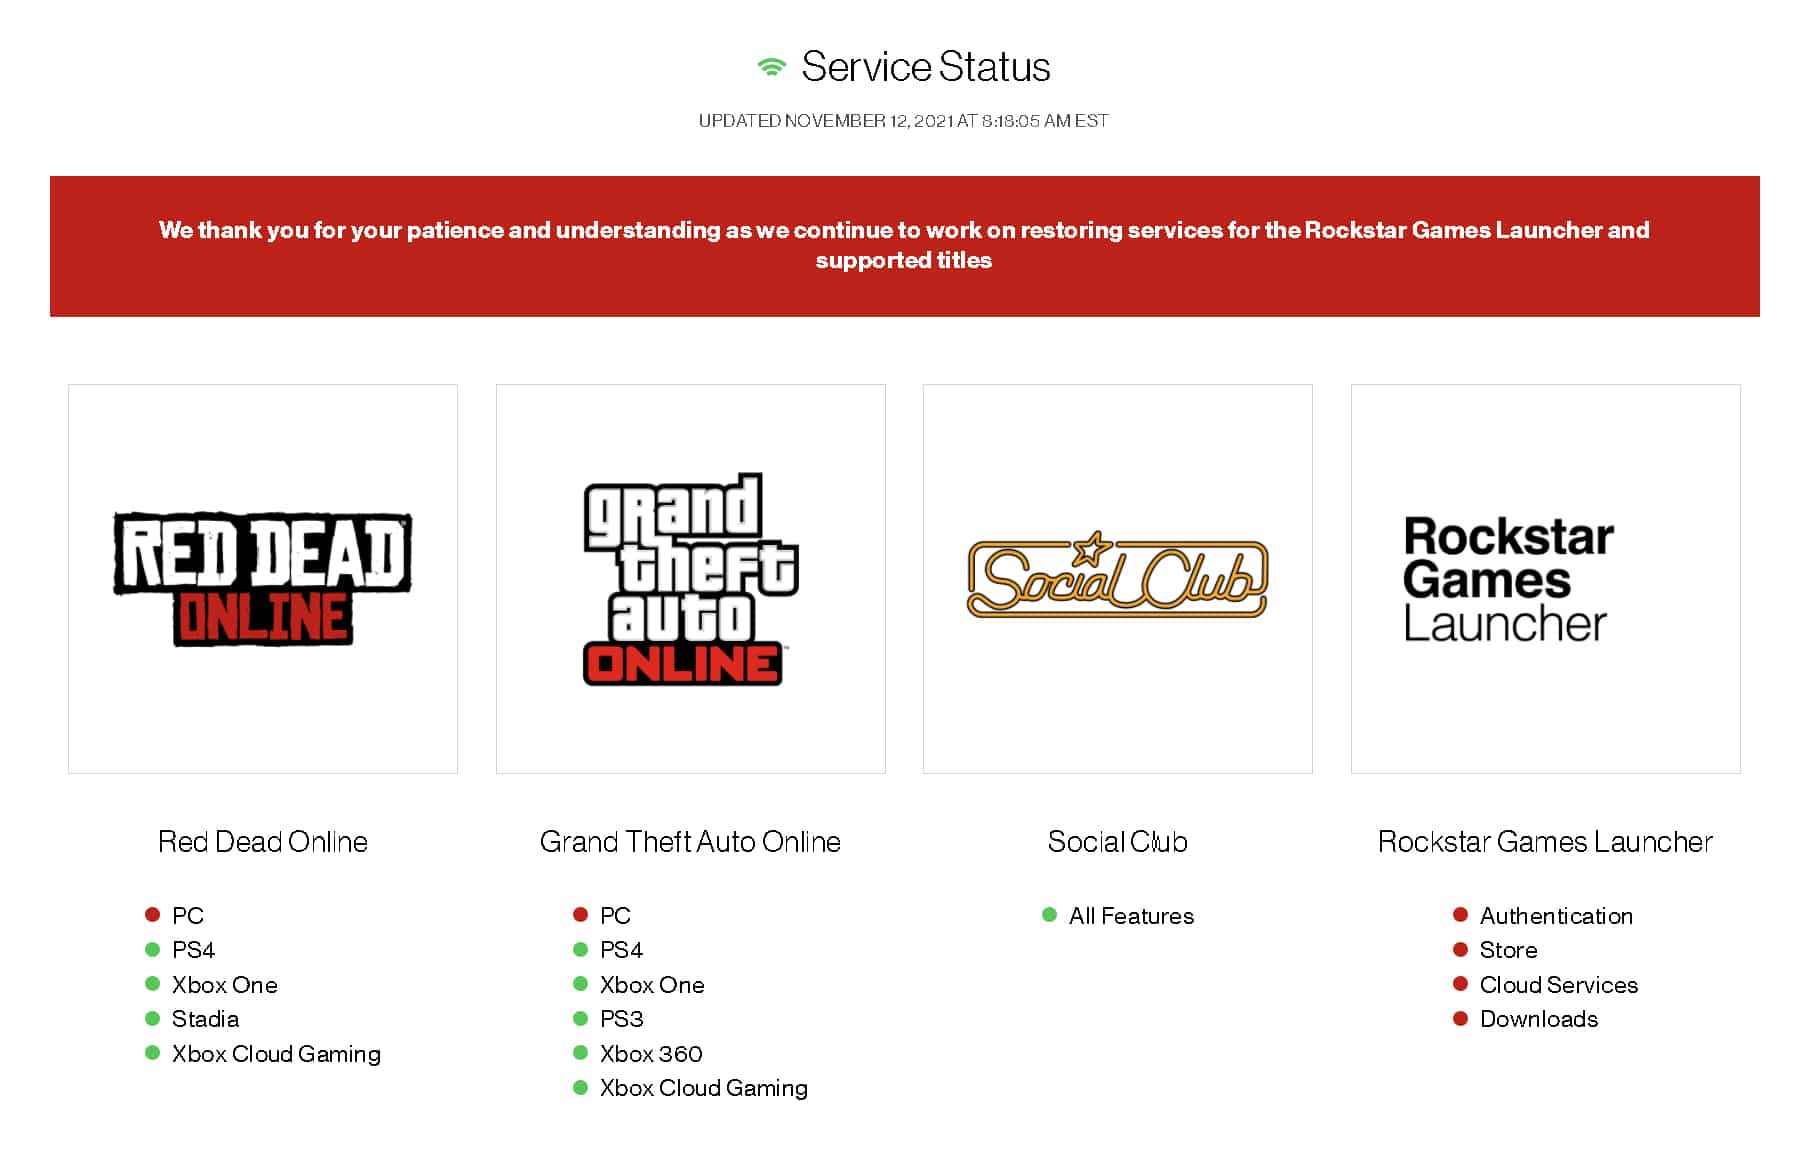 glæde Efterår alligevel GTA Trilogy Suffers from Disastrous Launch: PC Version Removed from Stores,  Rockstar Launcher Down for over 24 Hours